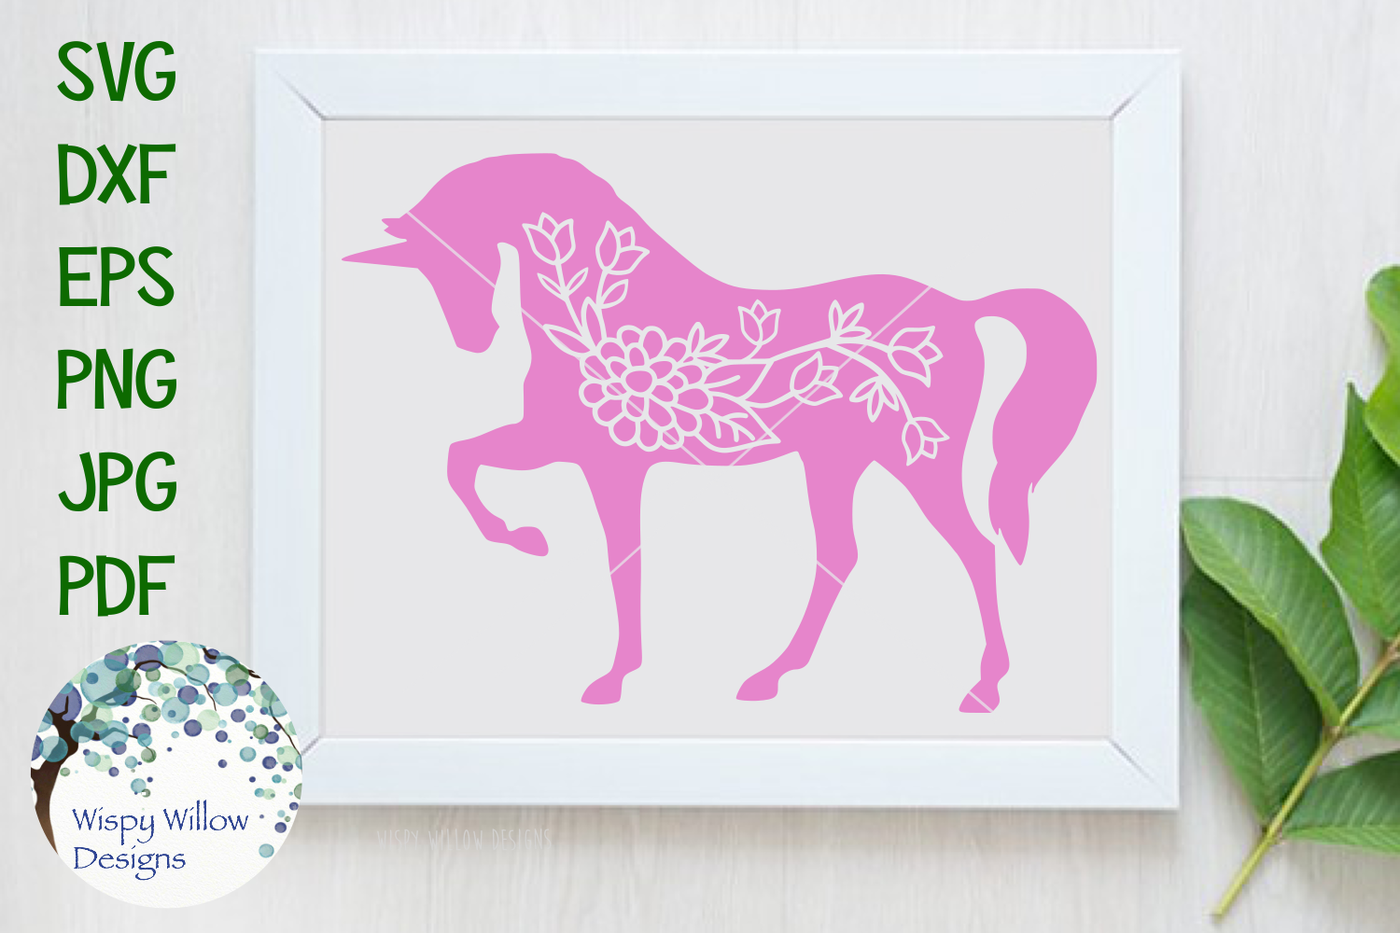 Download Floral Unicorn SVG DXF PNG JPG EPS PDF By Wispy Willow Designs | TheHungryJPEG.com